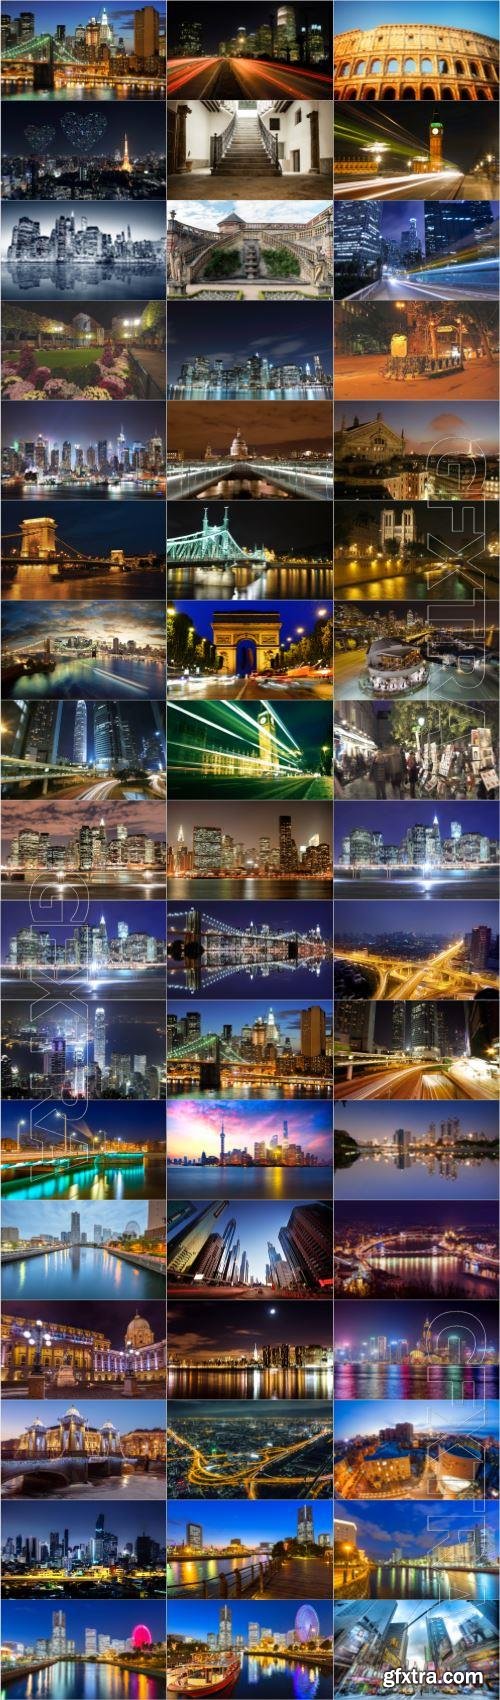 Countries and cities bundle stock photo 2